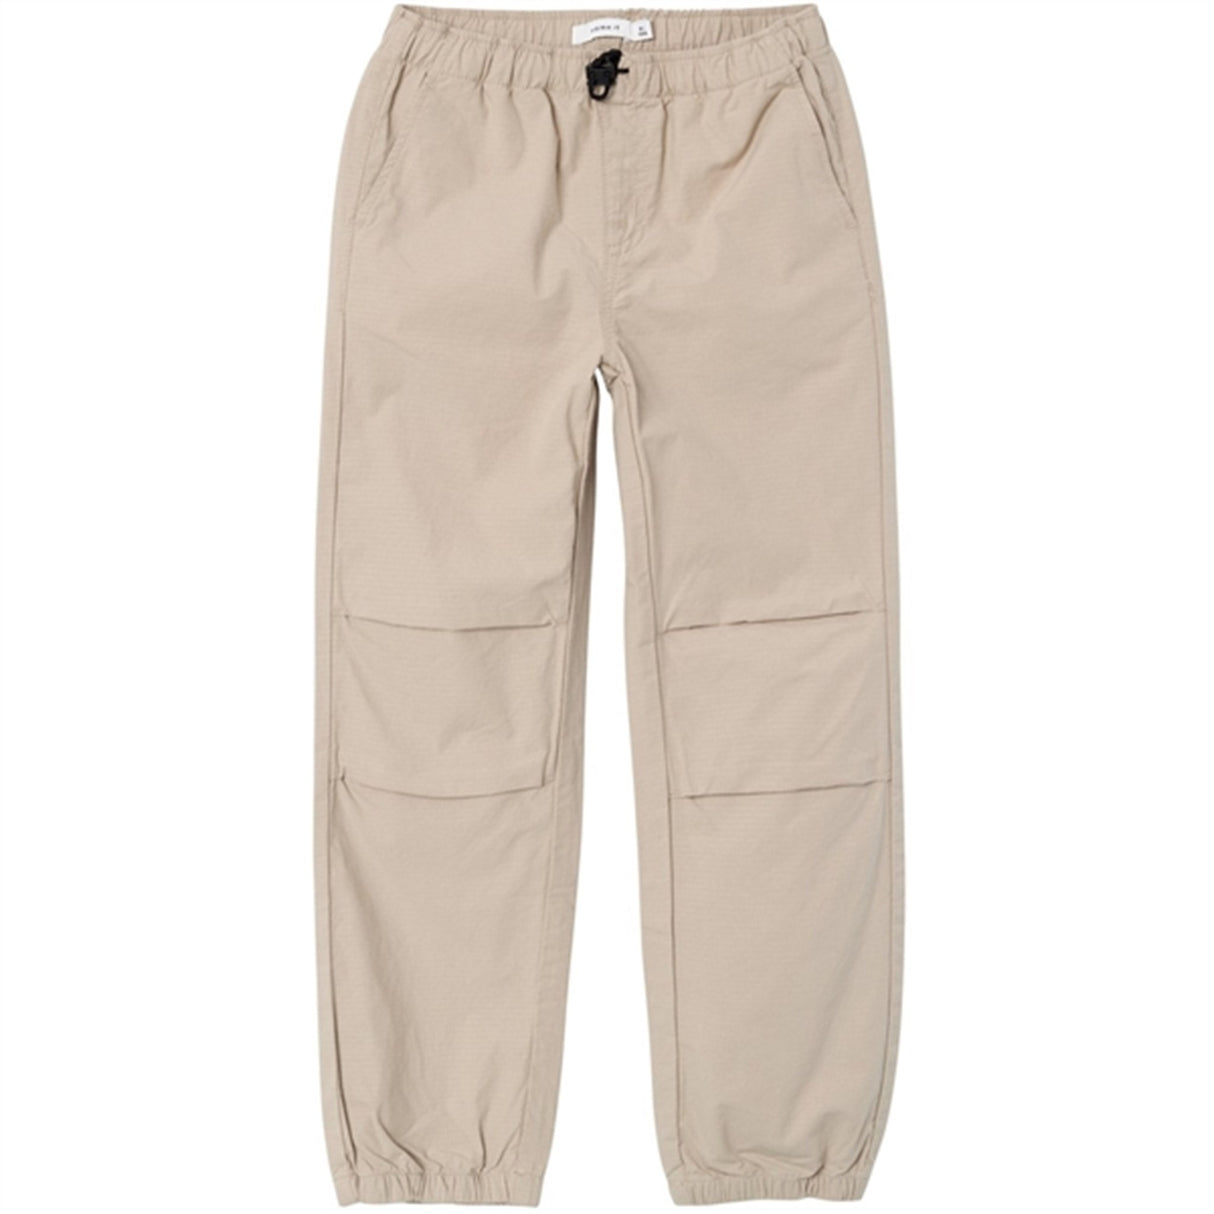 Name it Pure Cashmere Bella Baggy Parachute Twill Pants